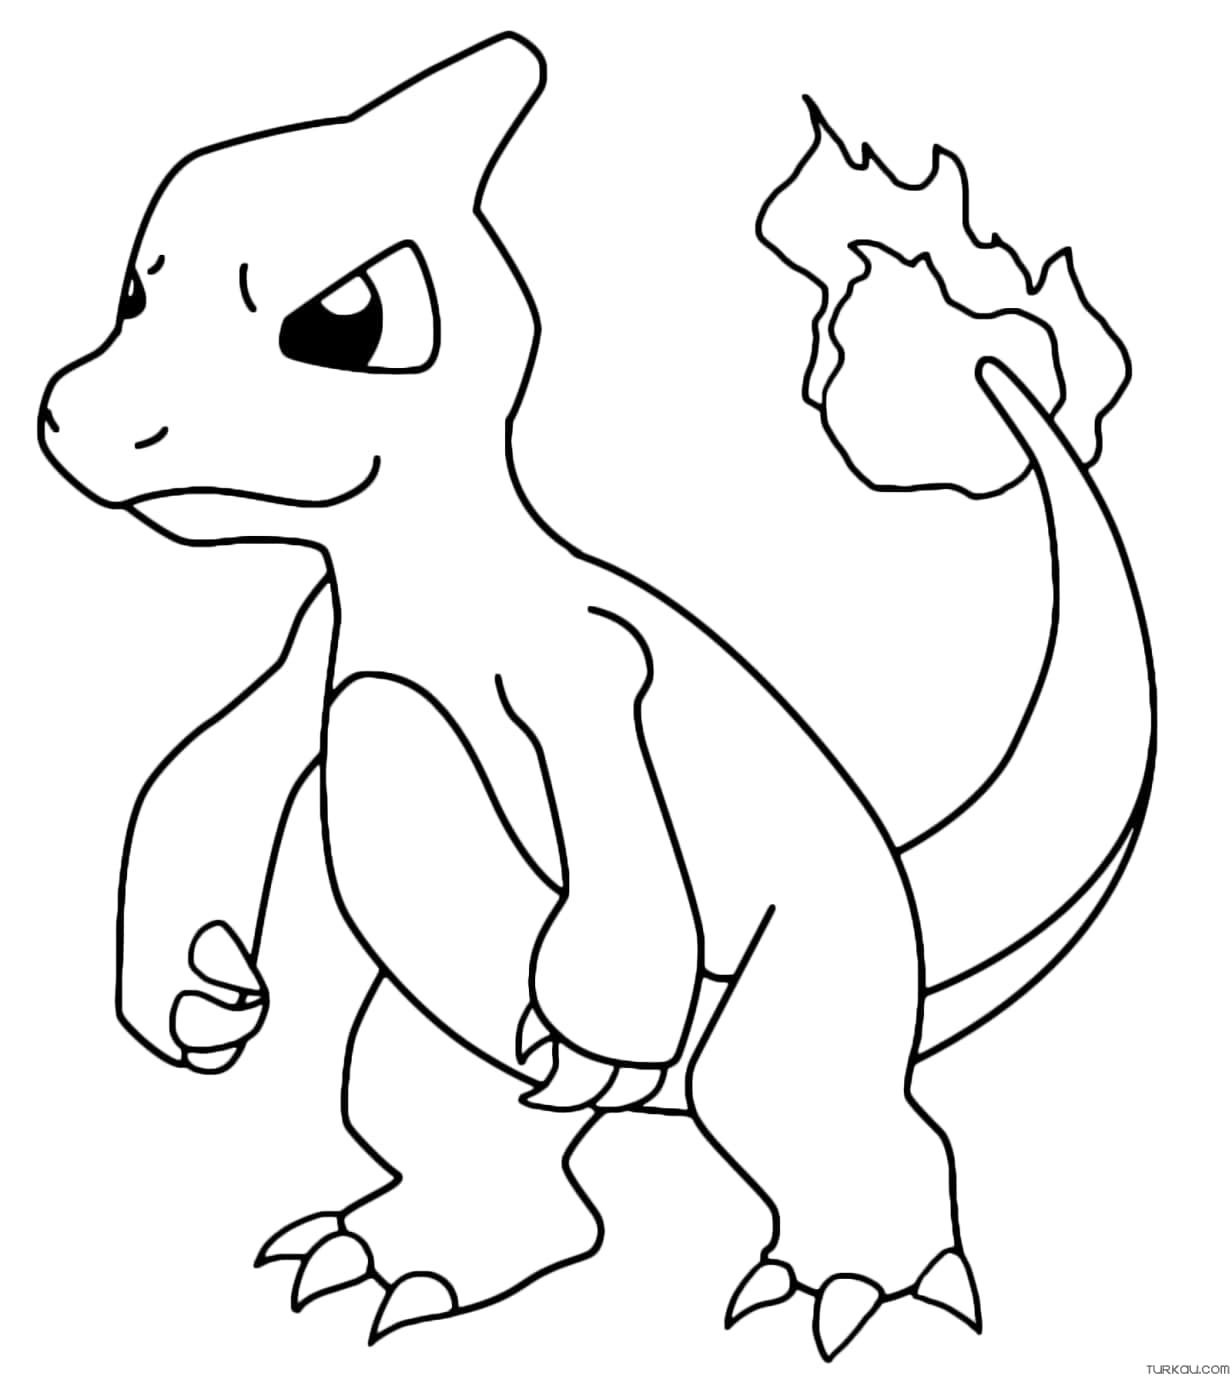 “Get creative with your favorite Pokemon characters by coloring them in!”